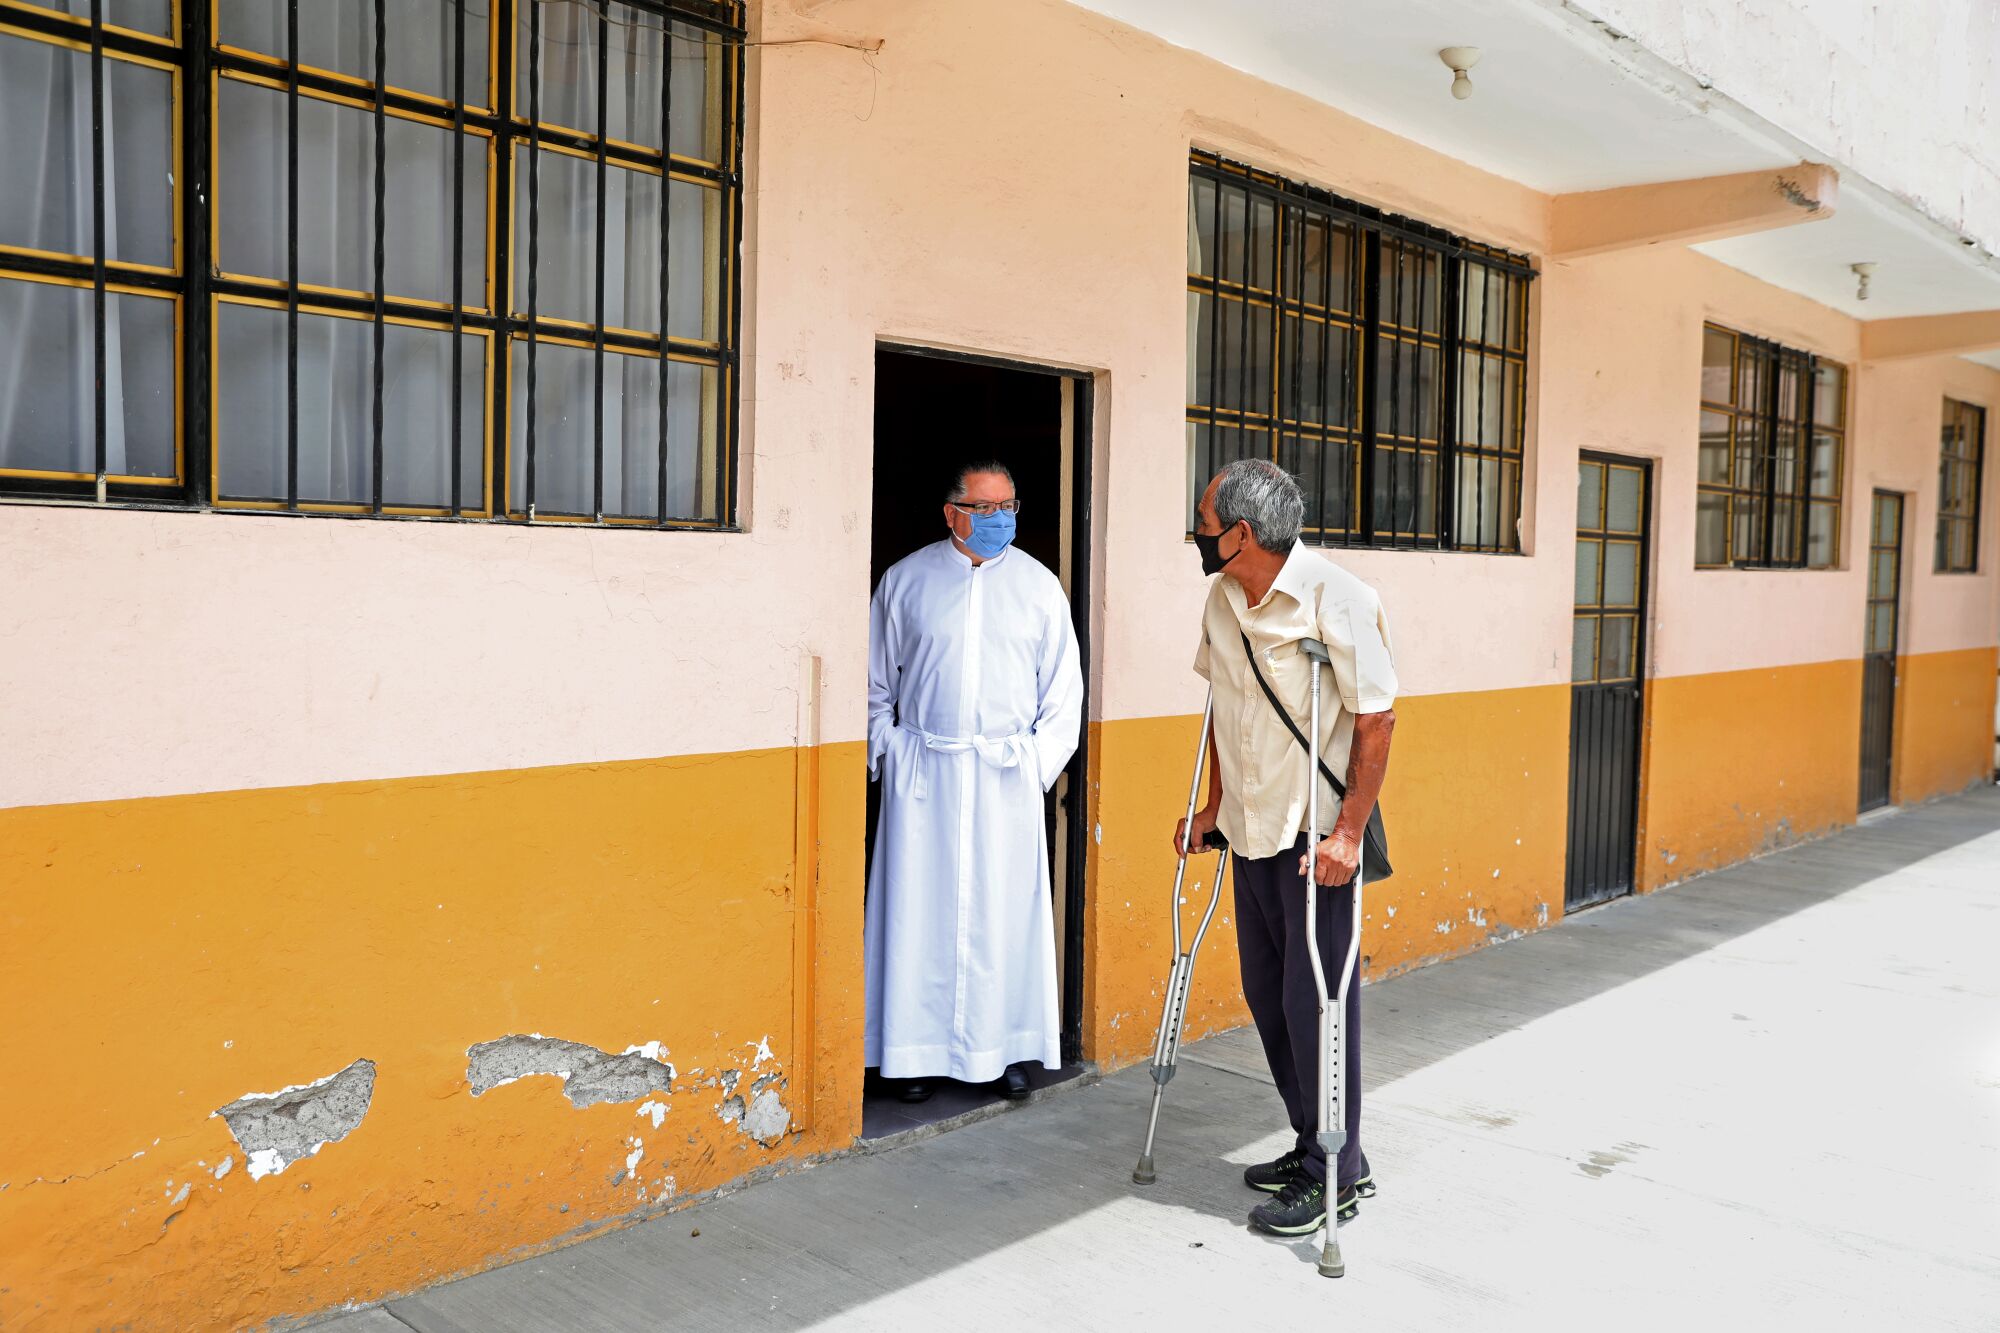 A man on crutches talks to a priest in white robes